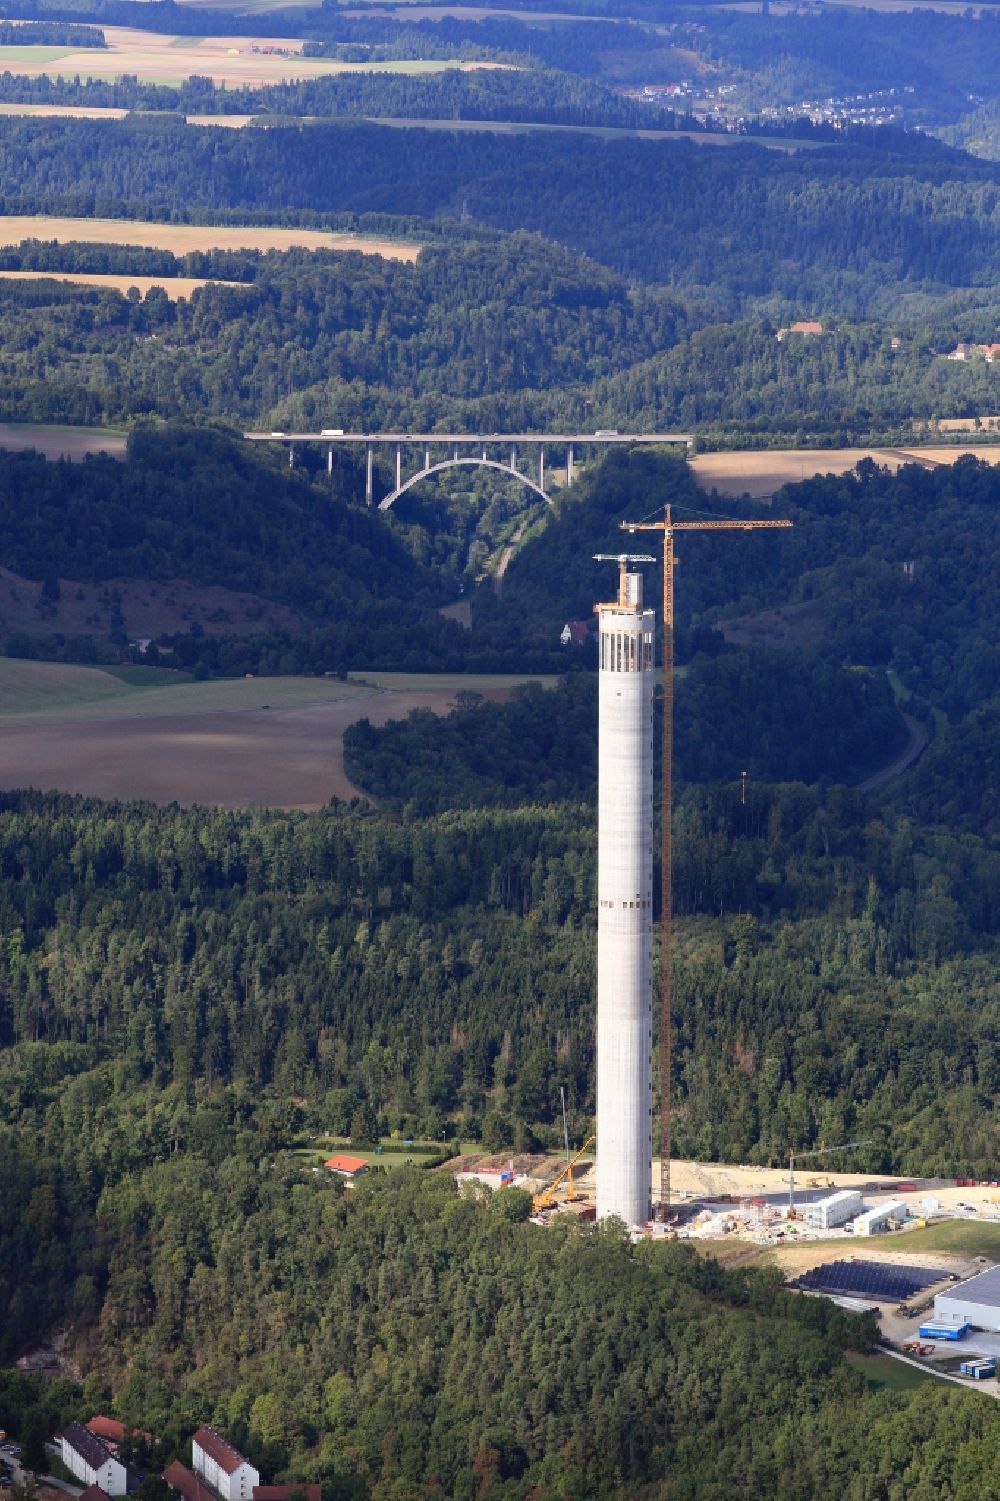 Rottweil from the bird's eye view: Construction and construction site of the ThyssenKrupp testing tower for Speed elevators in Rottweil in Baden - Wuerttemberg. When finished the new landmark of the town of Rottweil will be the tallest structure in Baden-Wuerttemberg